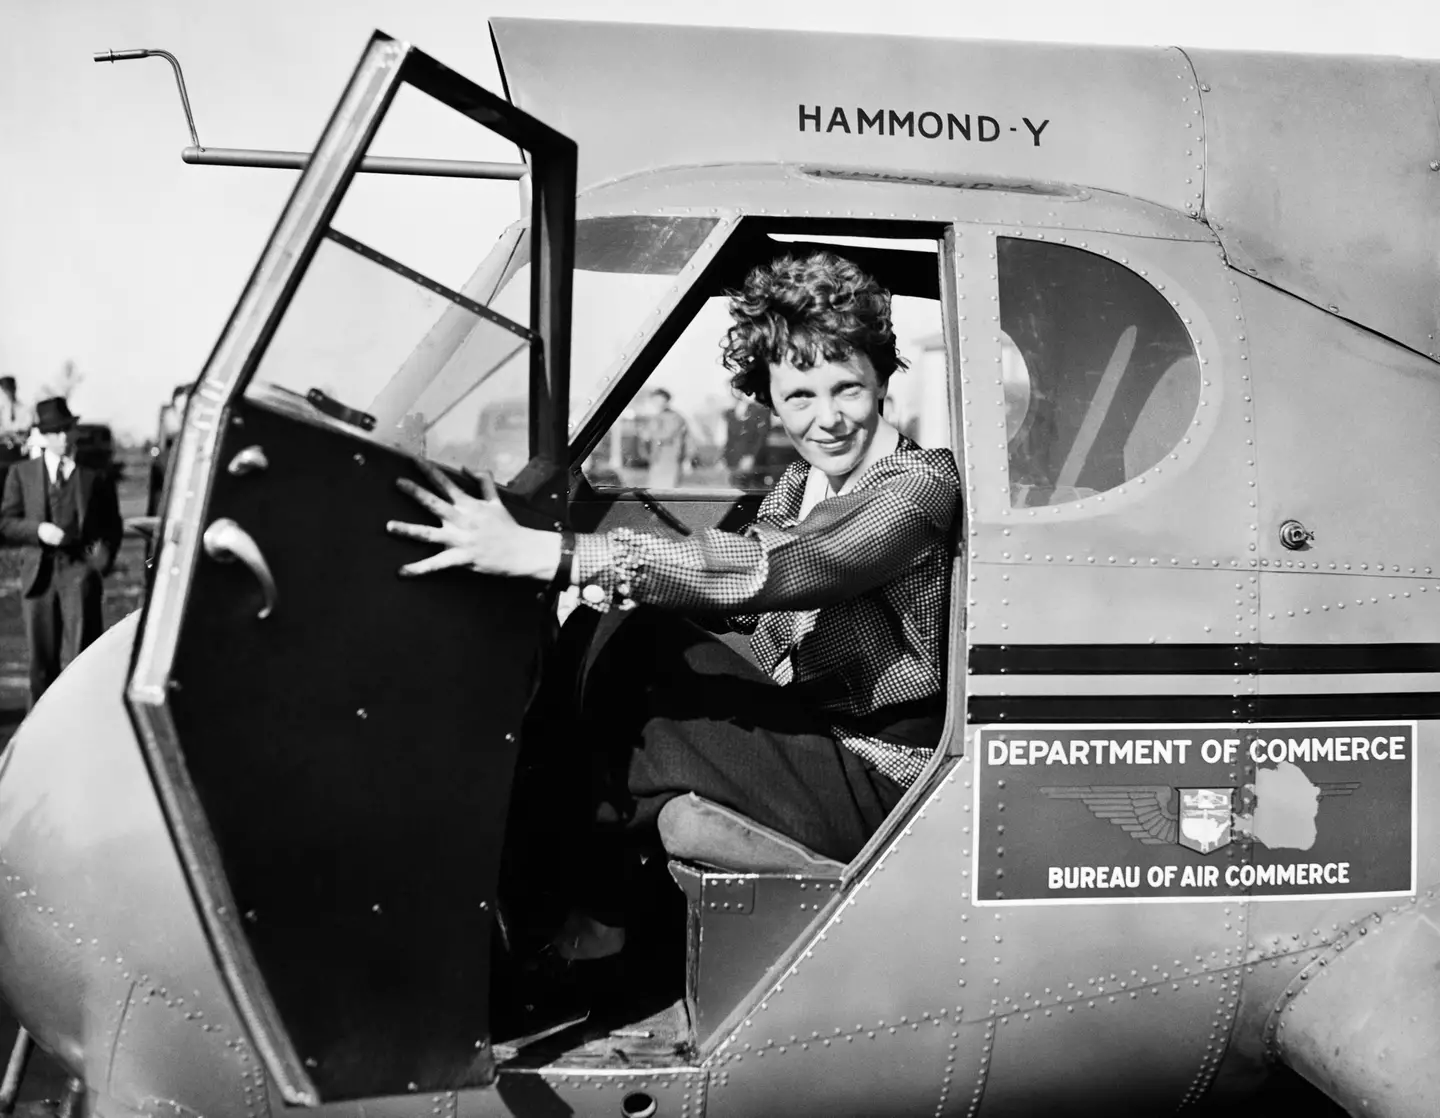 Earhart's plane went missing over the Pacific Ocean in 1937, prompting conspiracy theories about her fate.